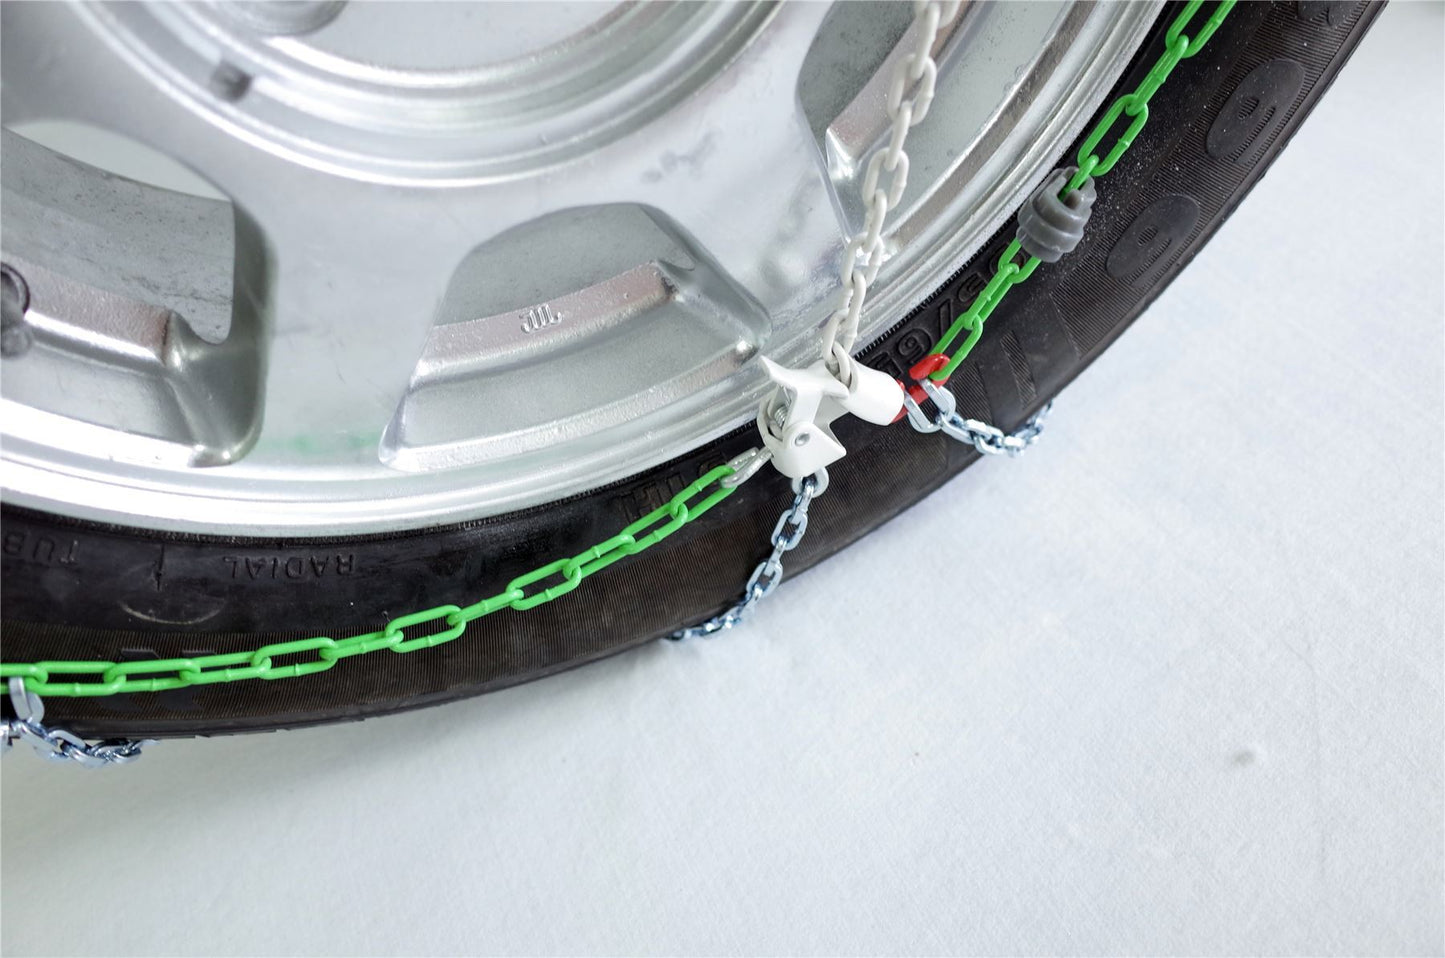 Green Valley TXR9 Winter 9mm Snow Chains - Car Tyre for 15" Wheels 215/60-15